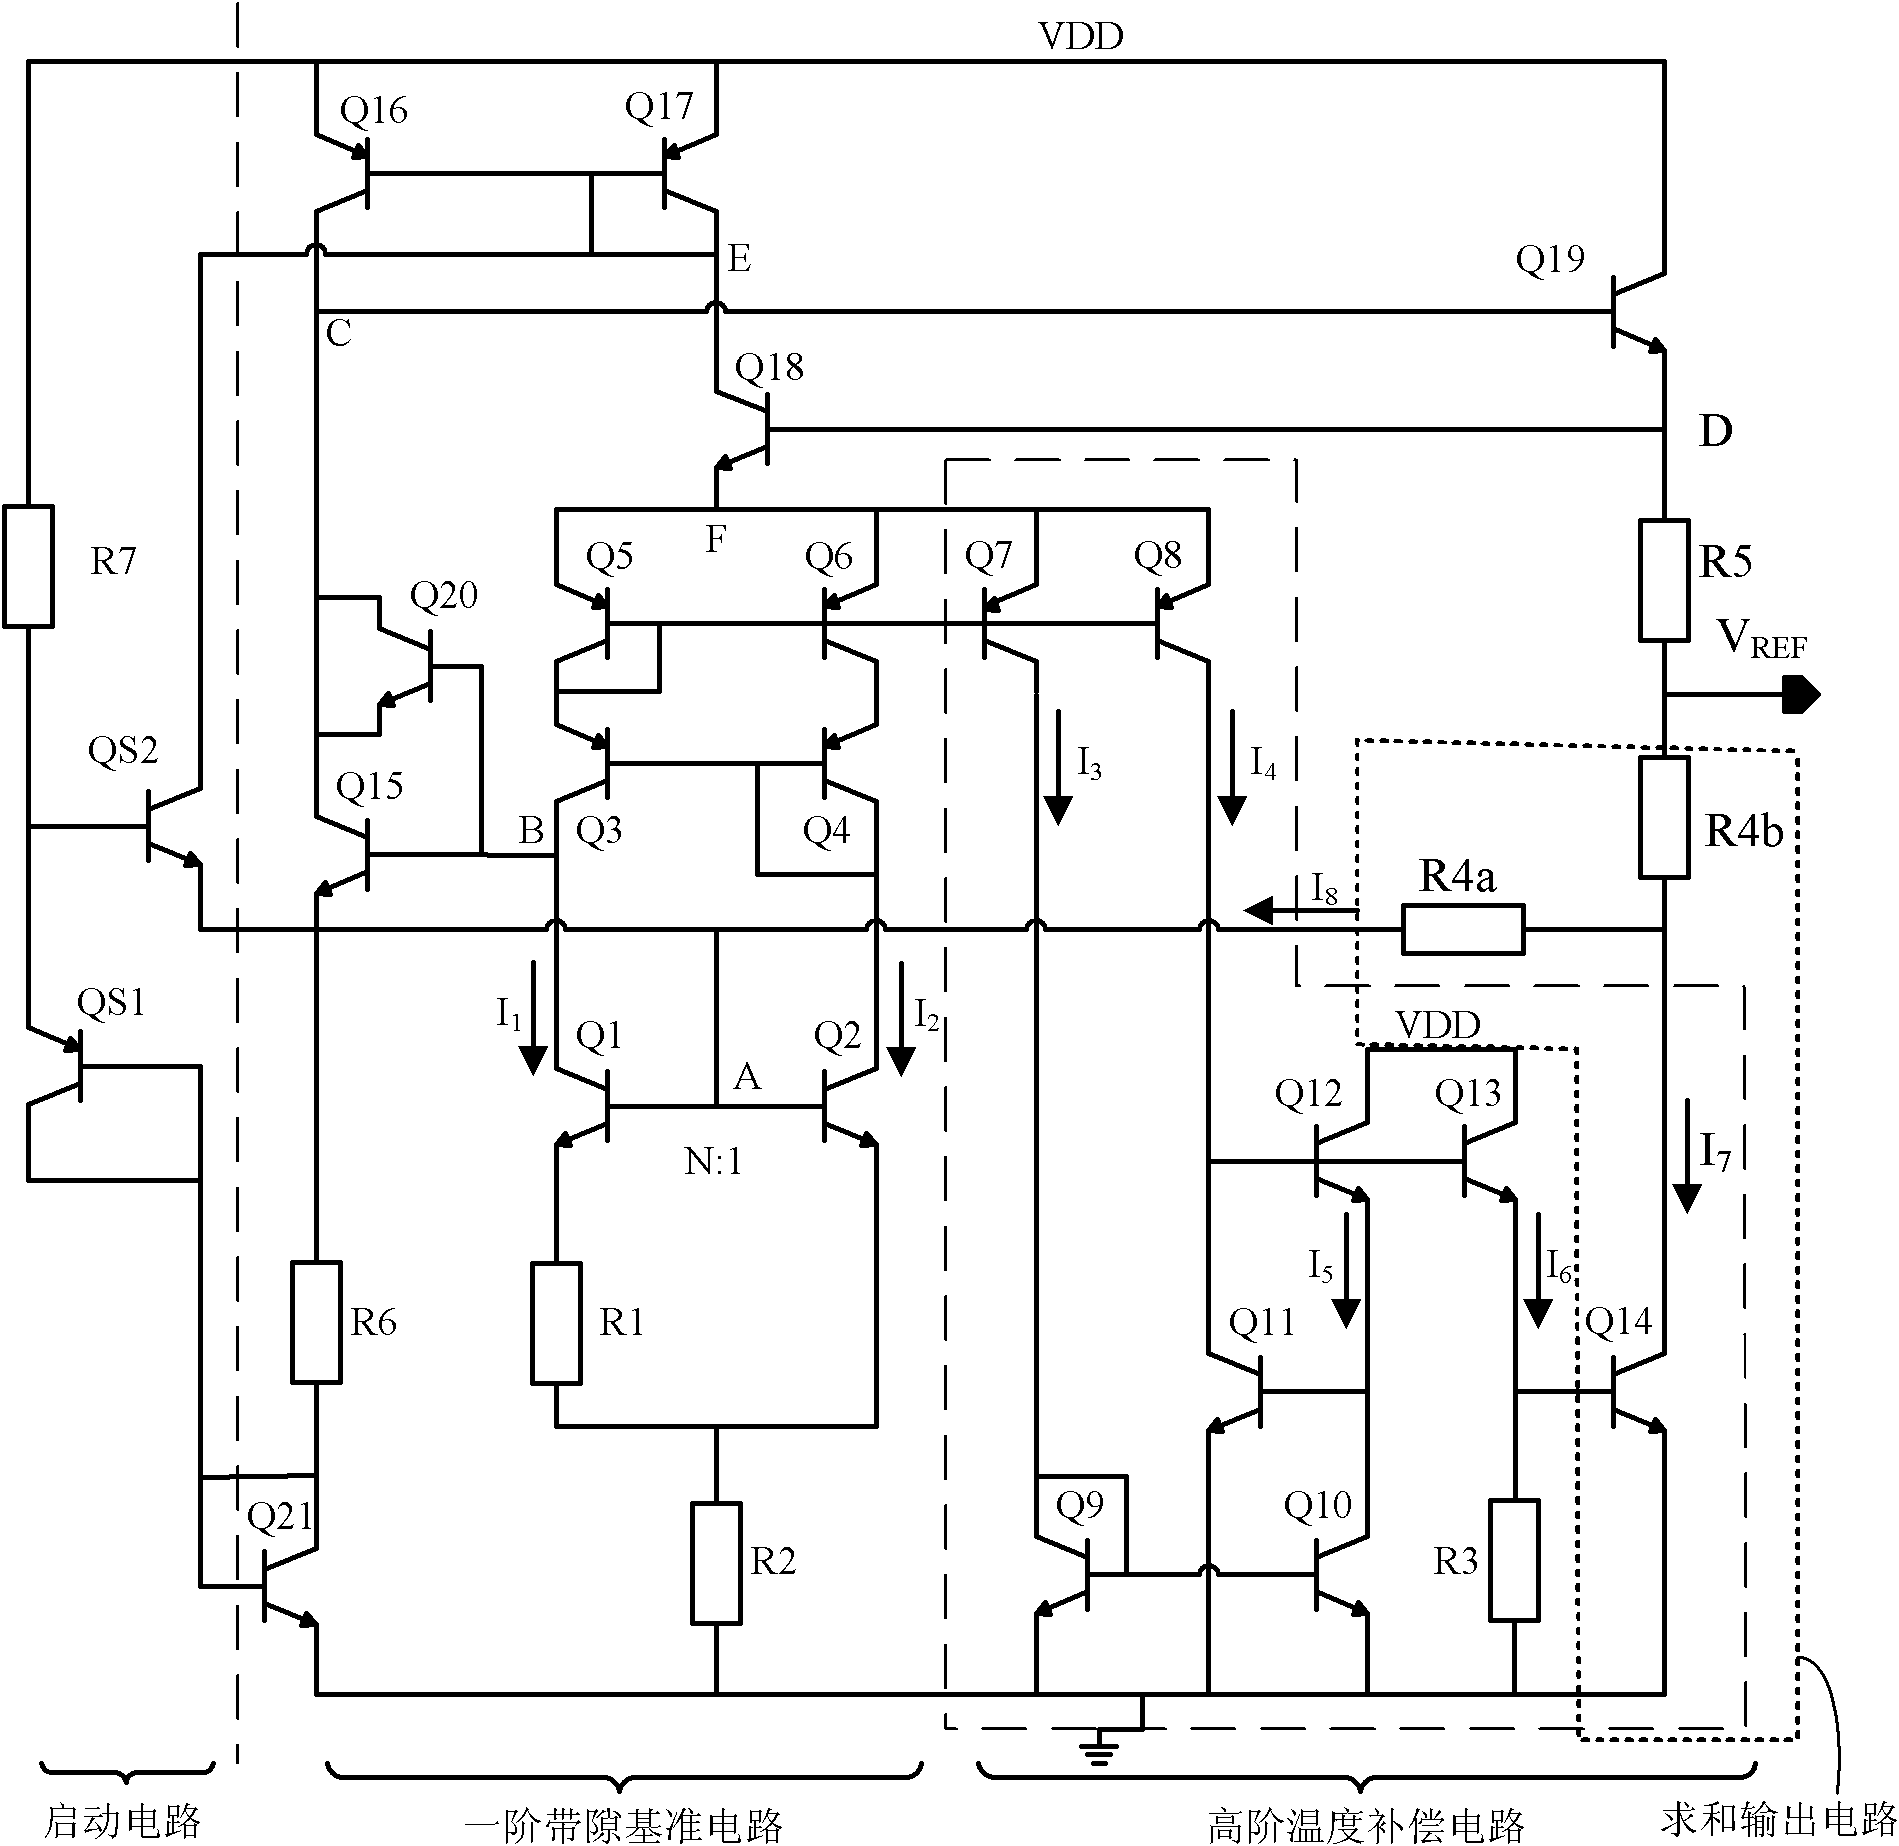 Band-gap voltage reference source for high-order temperature compensation